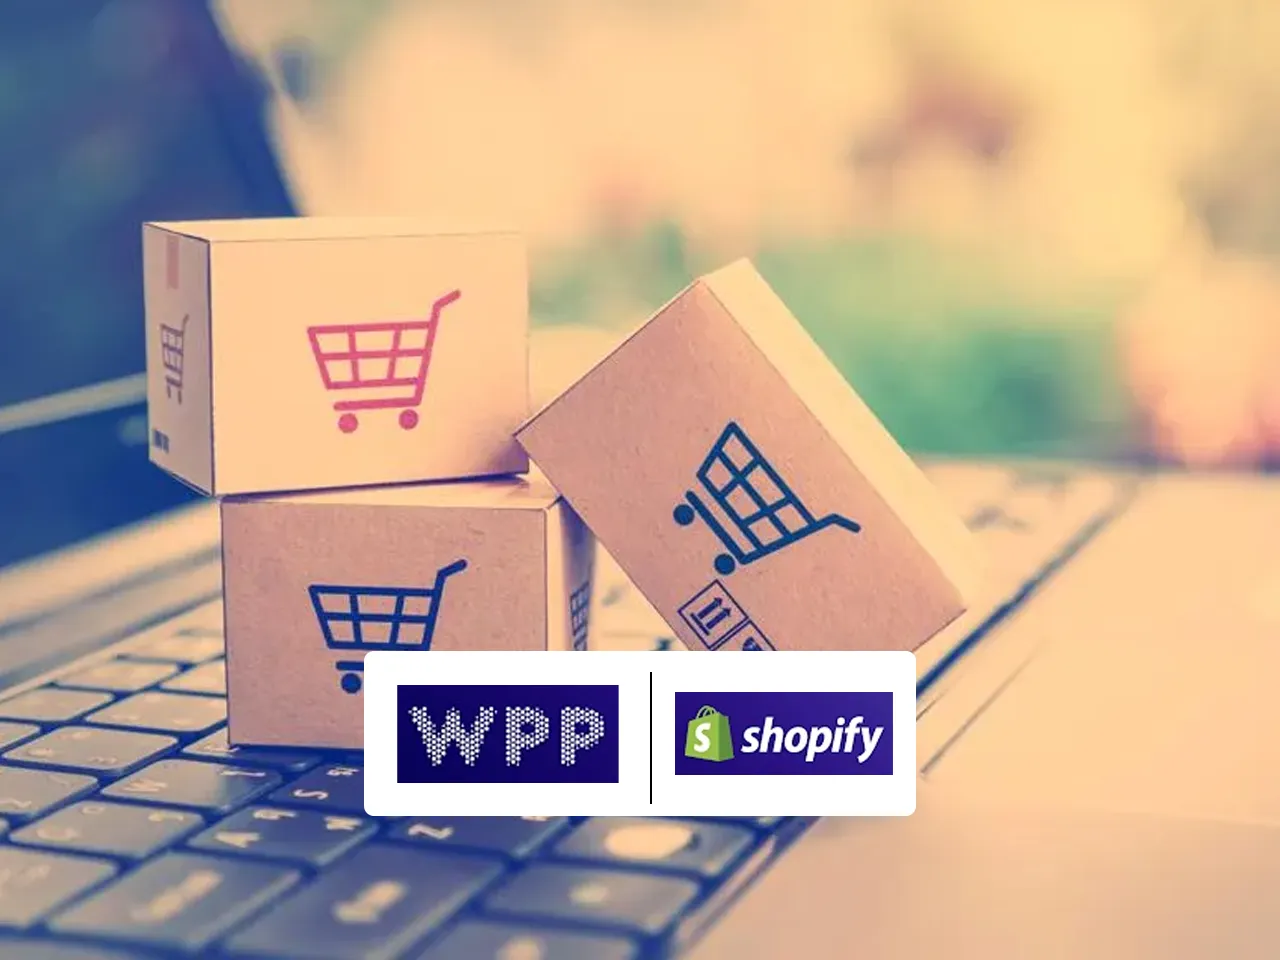 WPP and Shopify join forces to expand their commerce solutions